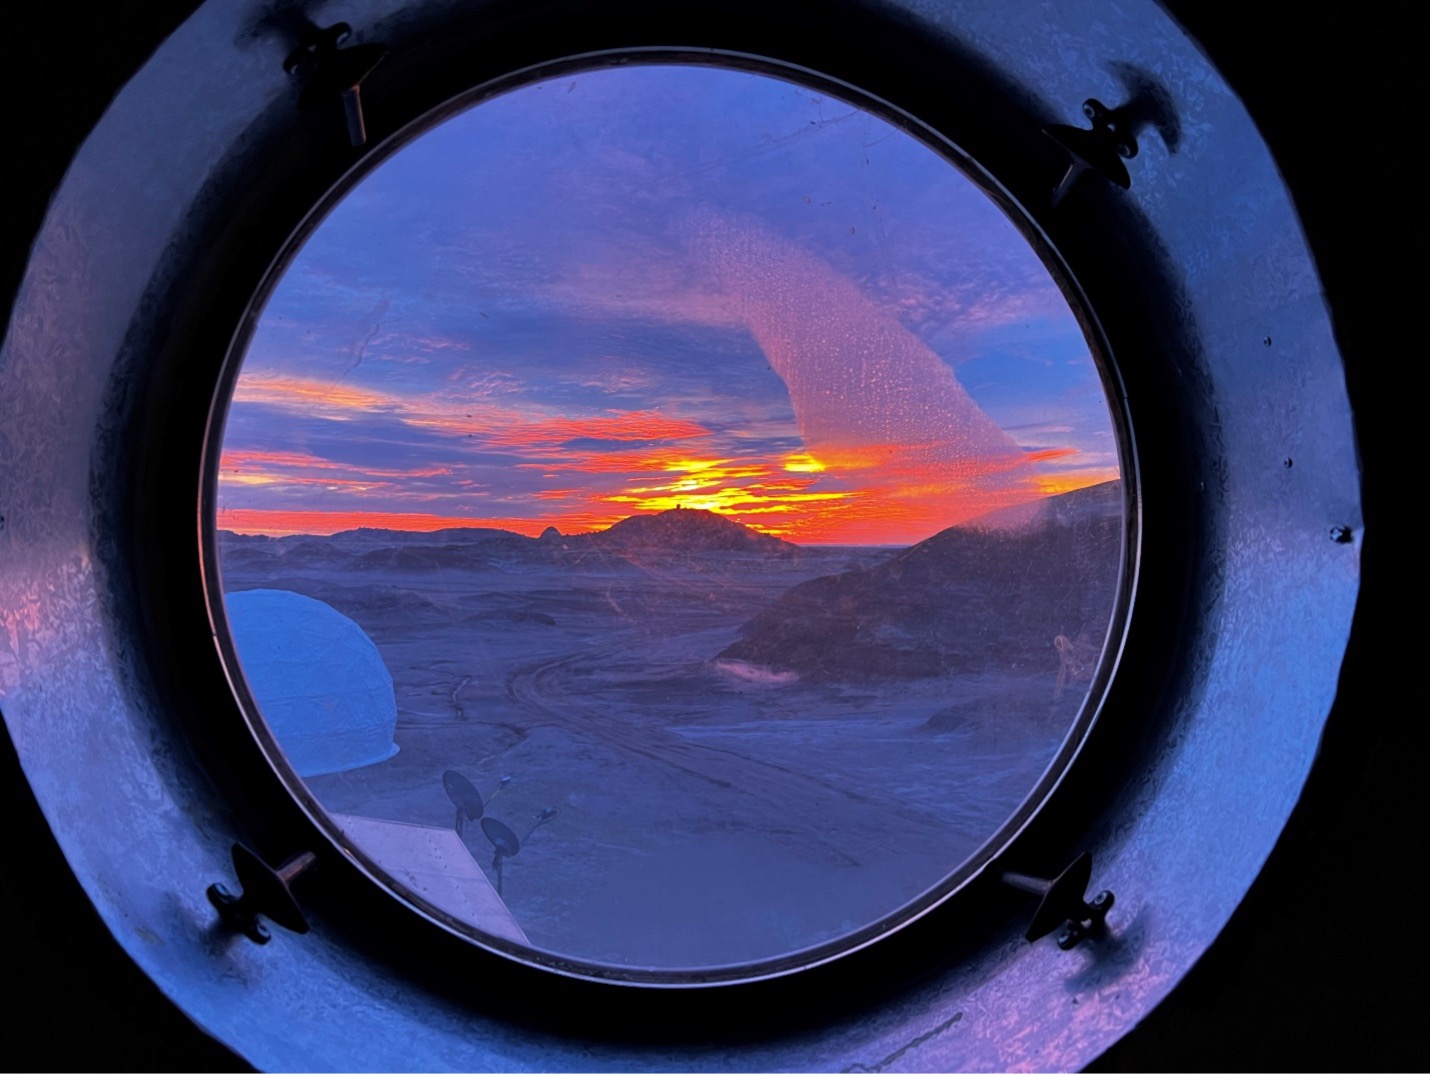 sunrise over the desert as seen through a small round window